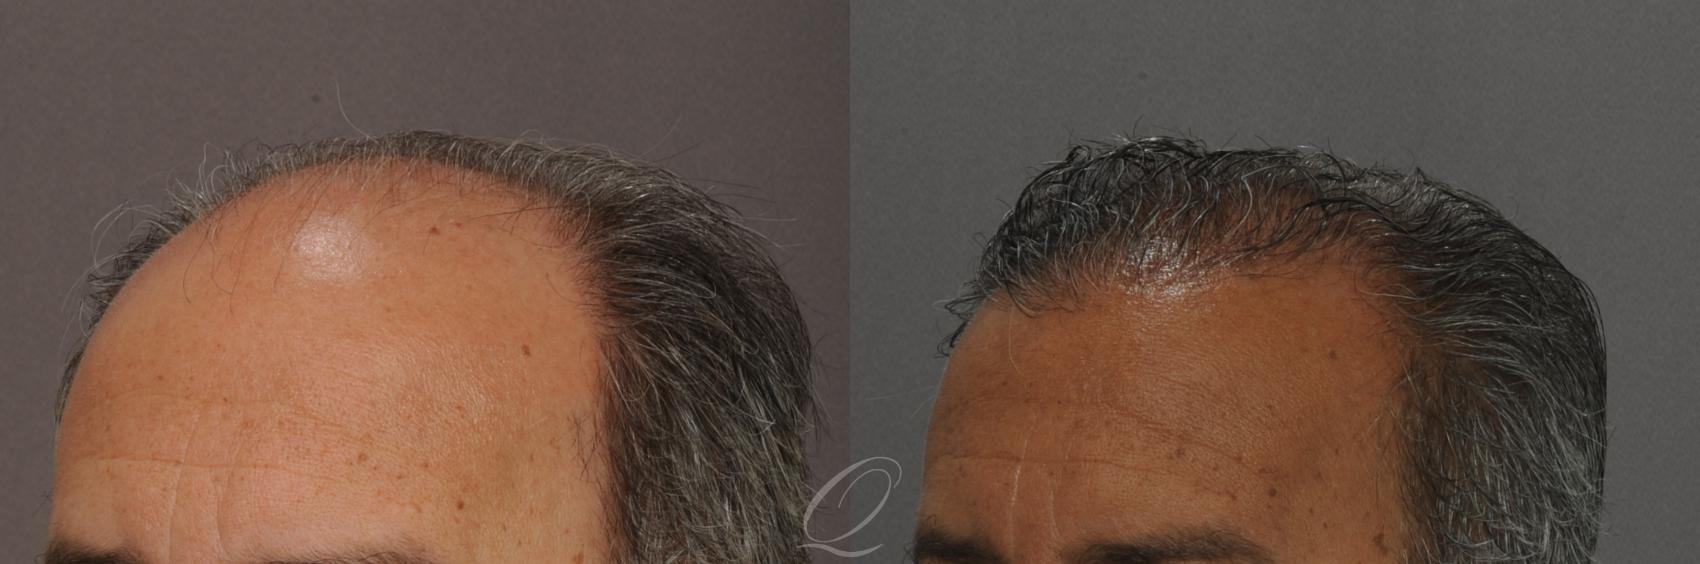 FUT Before & After Photos Patient 1012 | Rochester, Buffalo, & Syracuse, NY  | Quatela Center for Hair Restoration